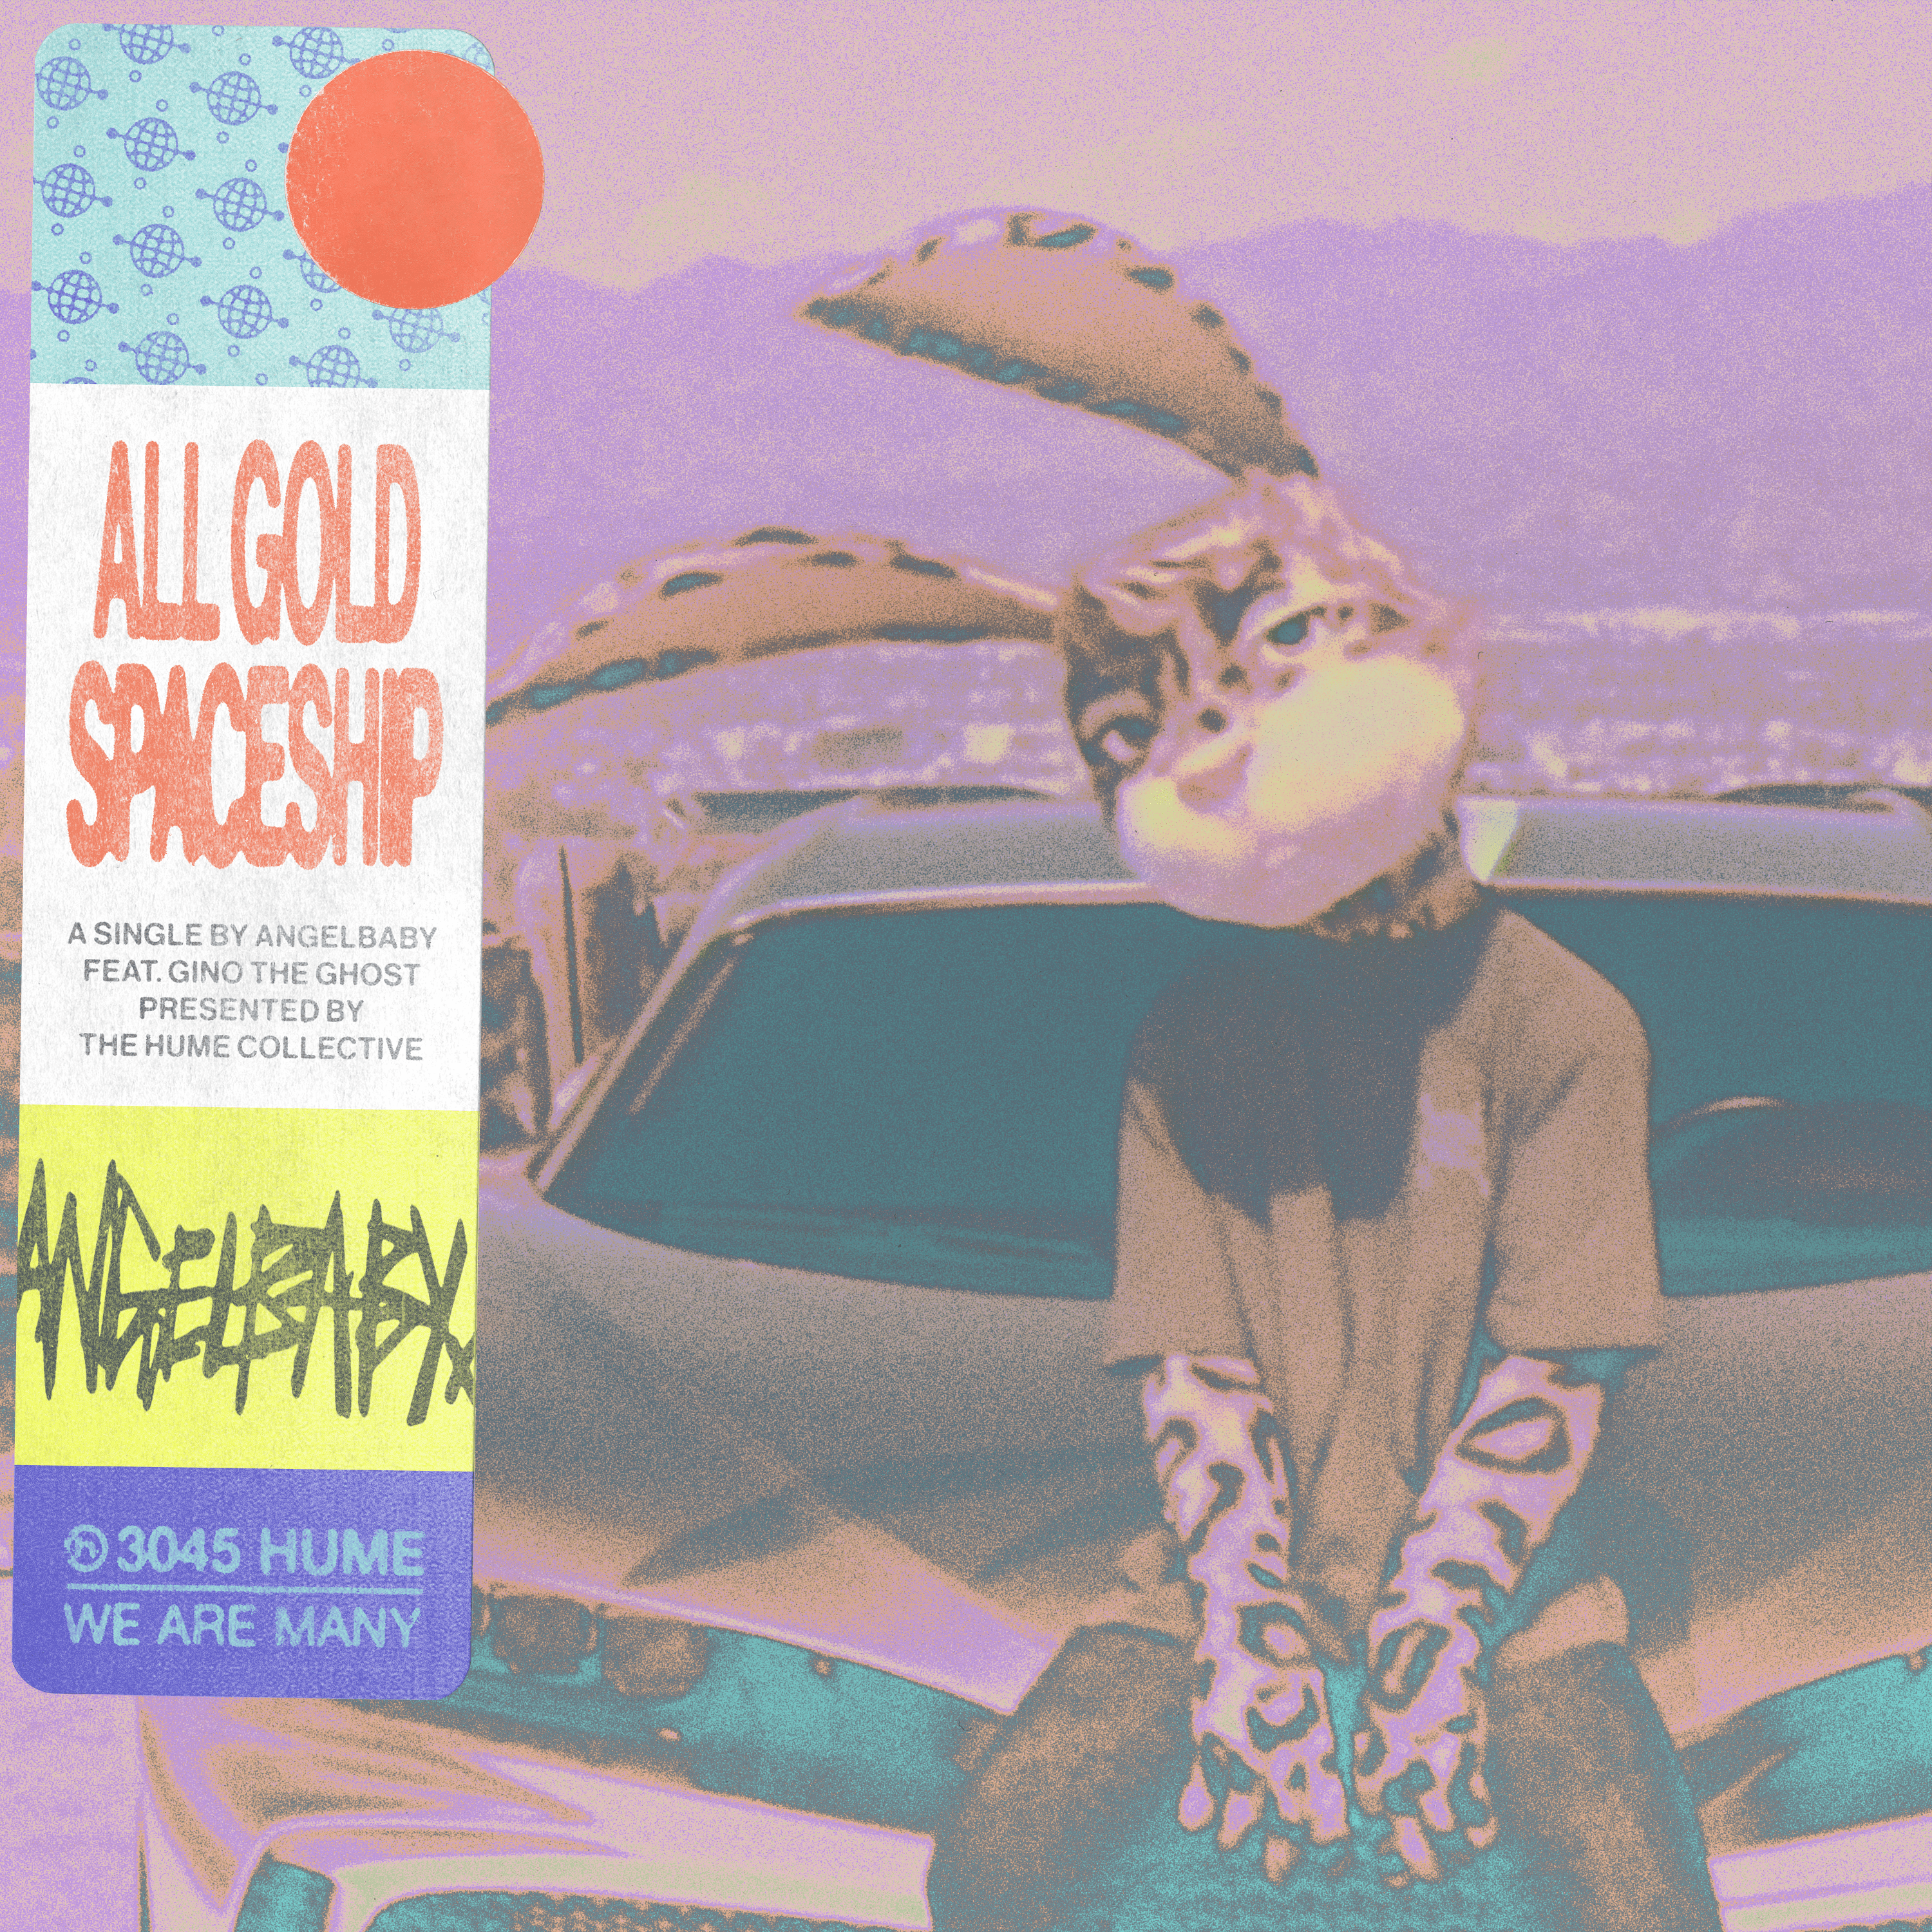 All Gold Spaceship #83